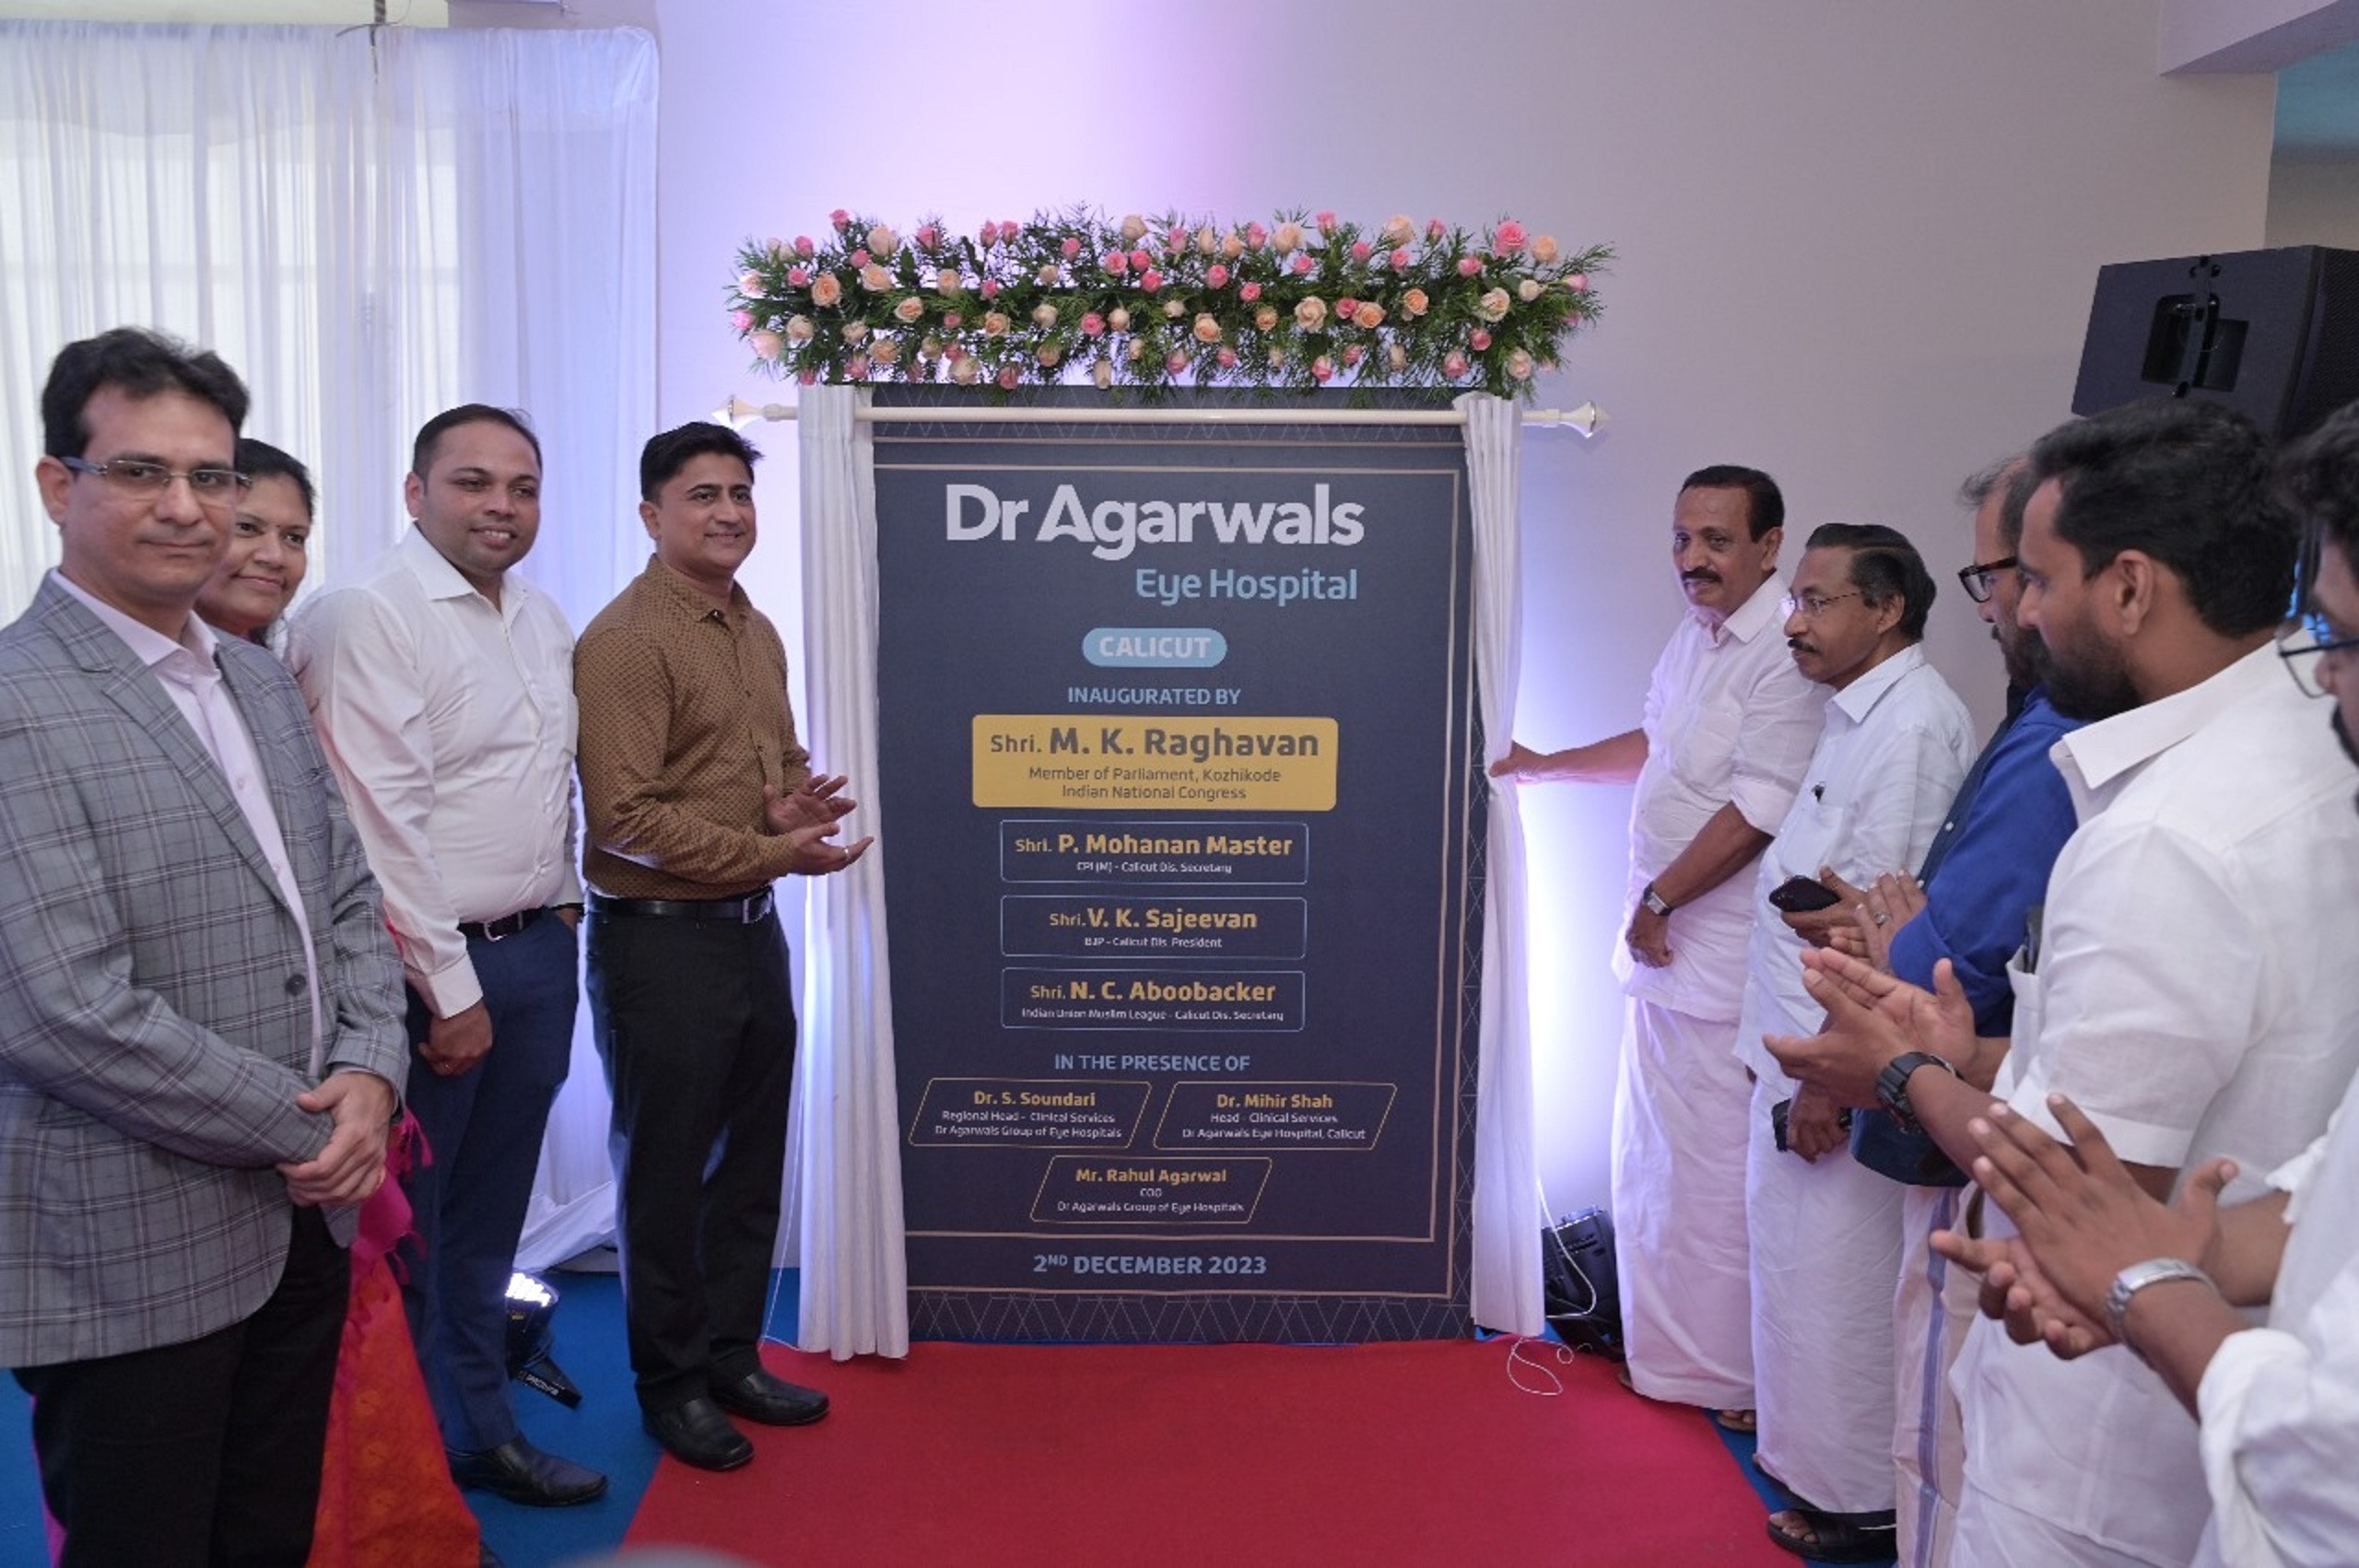 Dr. Agarwals Launches State-of-the-Art Eye Hospital in Calicut